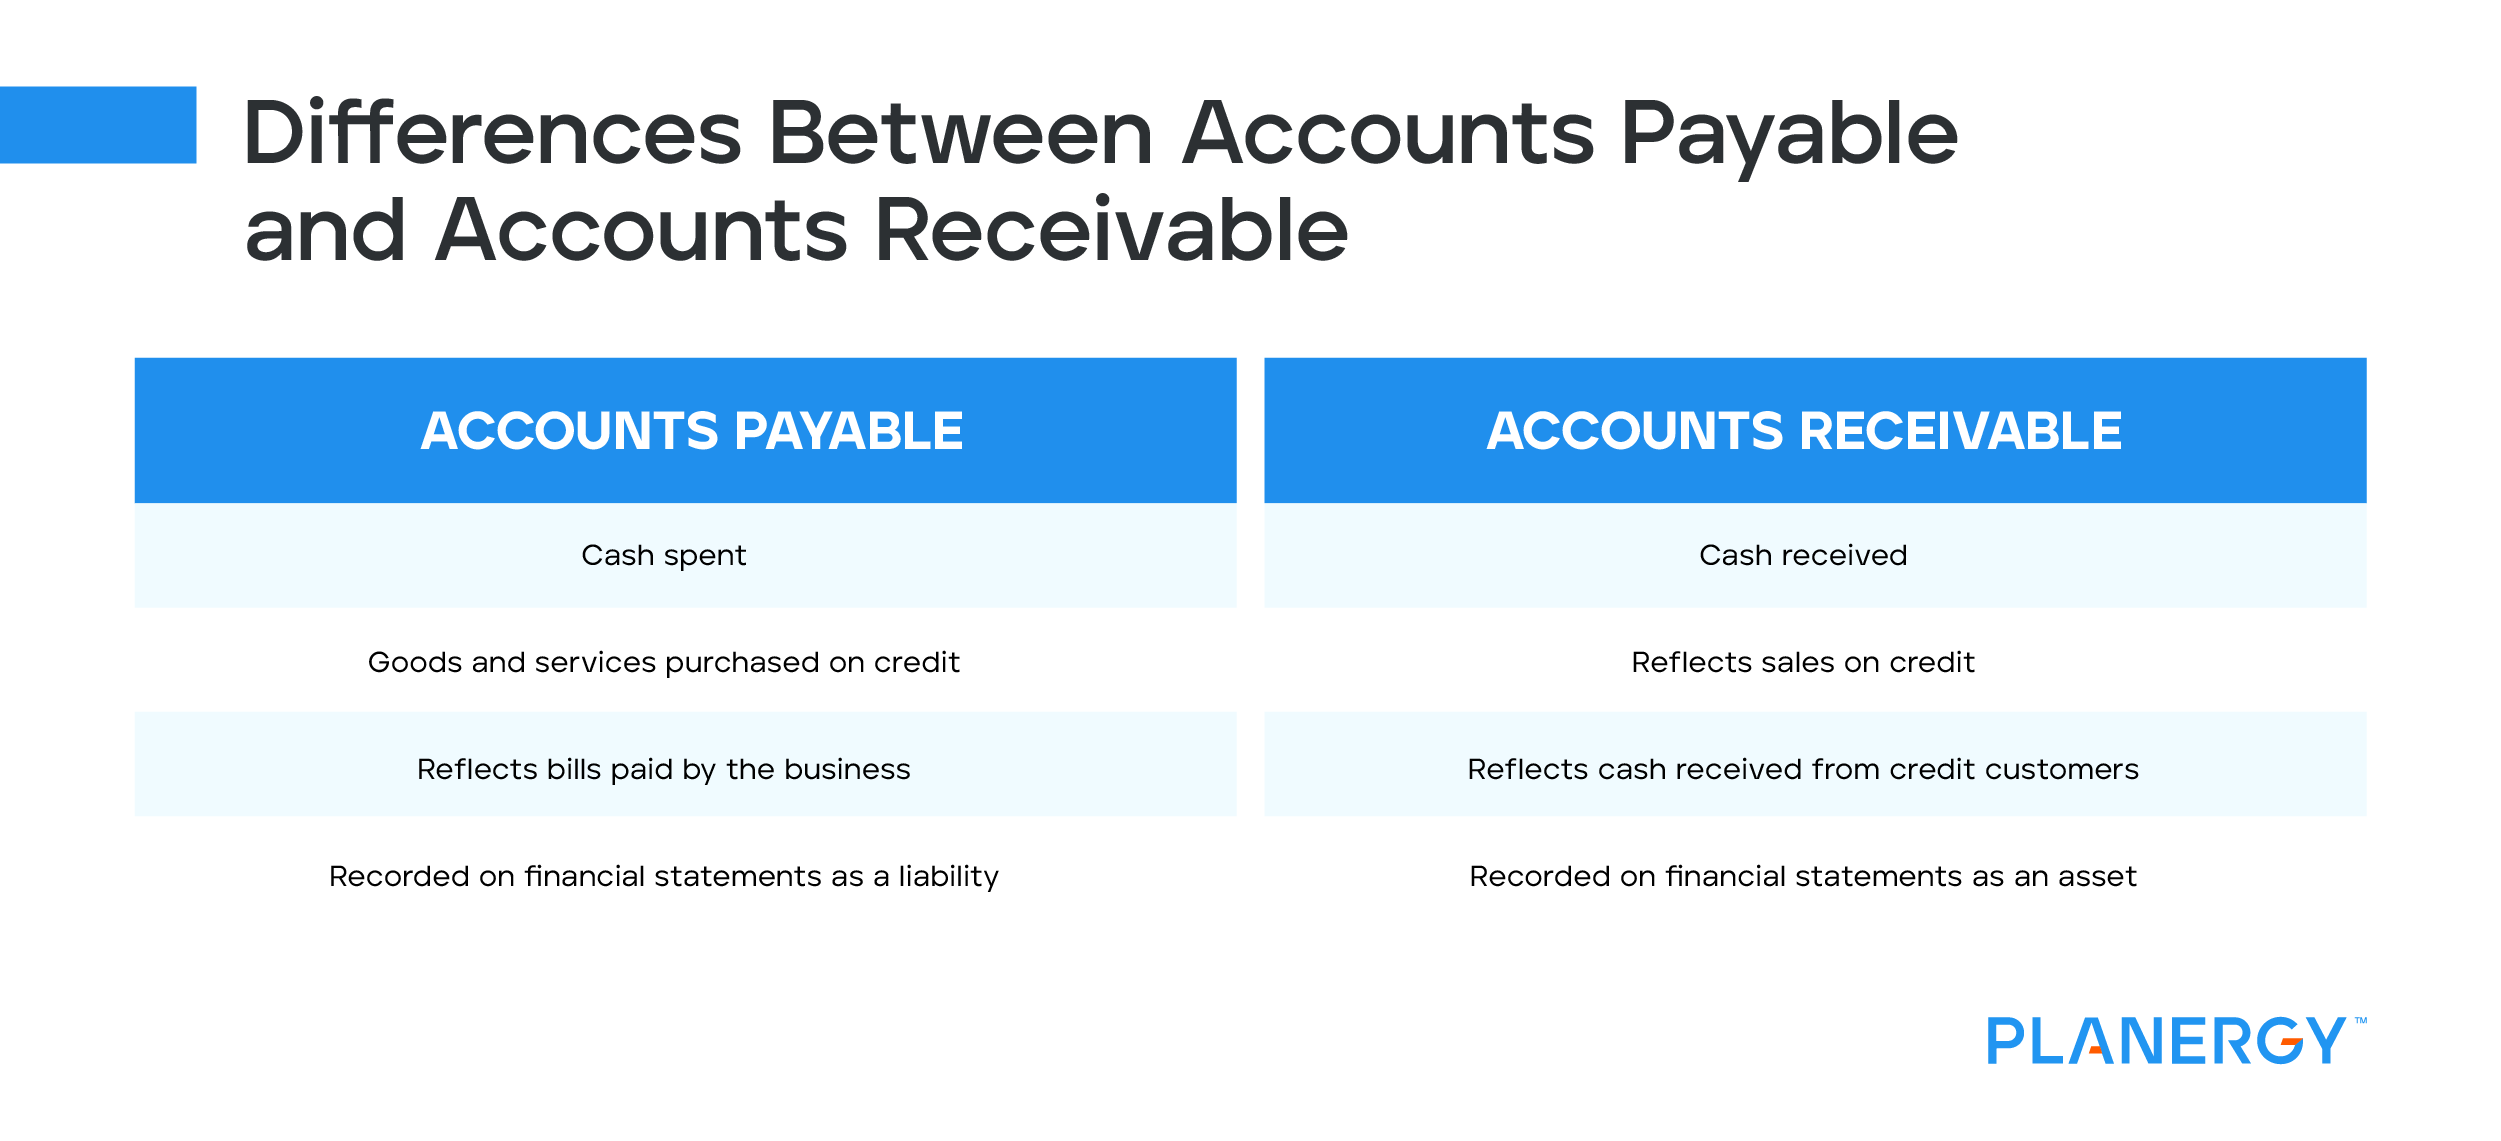 Differences Between Accounts Payable and Accounts Receivable